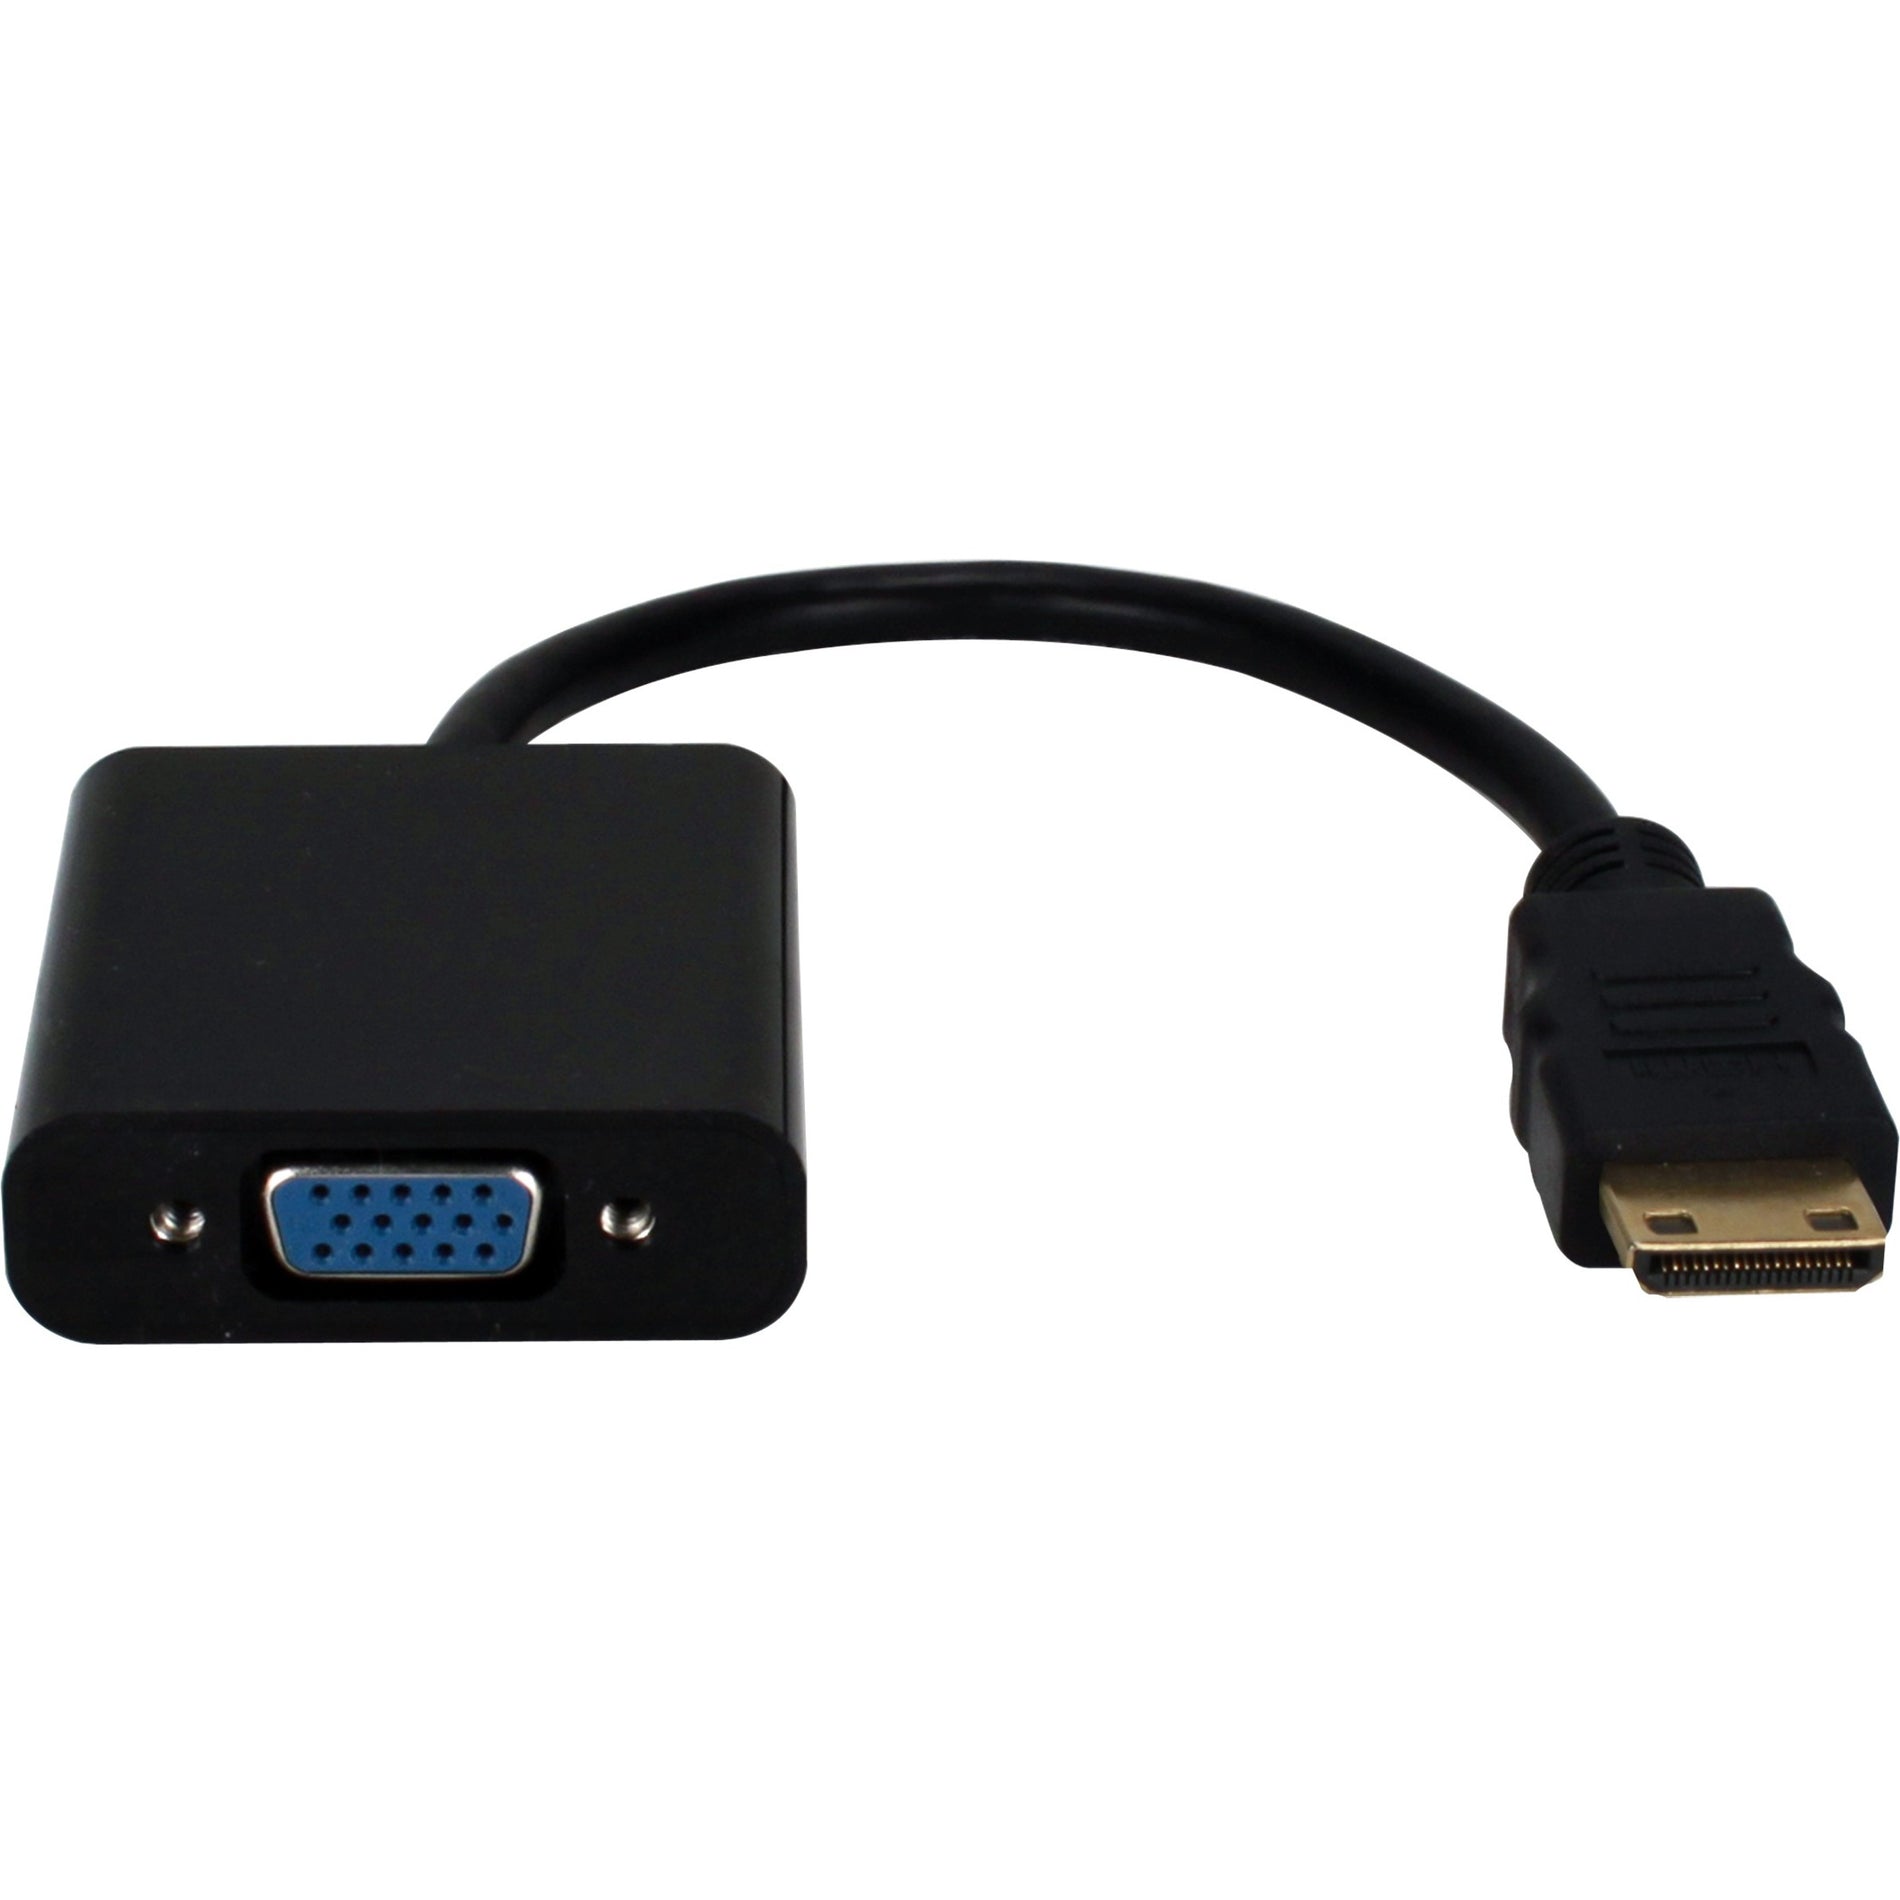 QVS XHDVC-MF Mini-HDMI to VGA Video Converter, Connect Notebook, Tablet, PC, Monitor, Projector